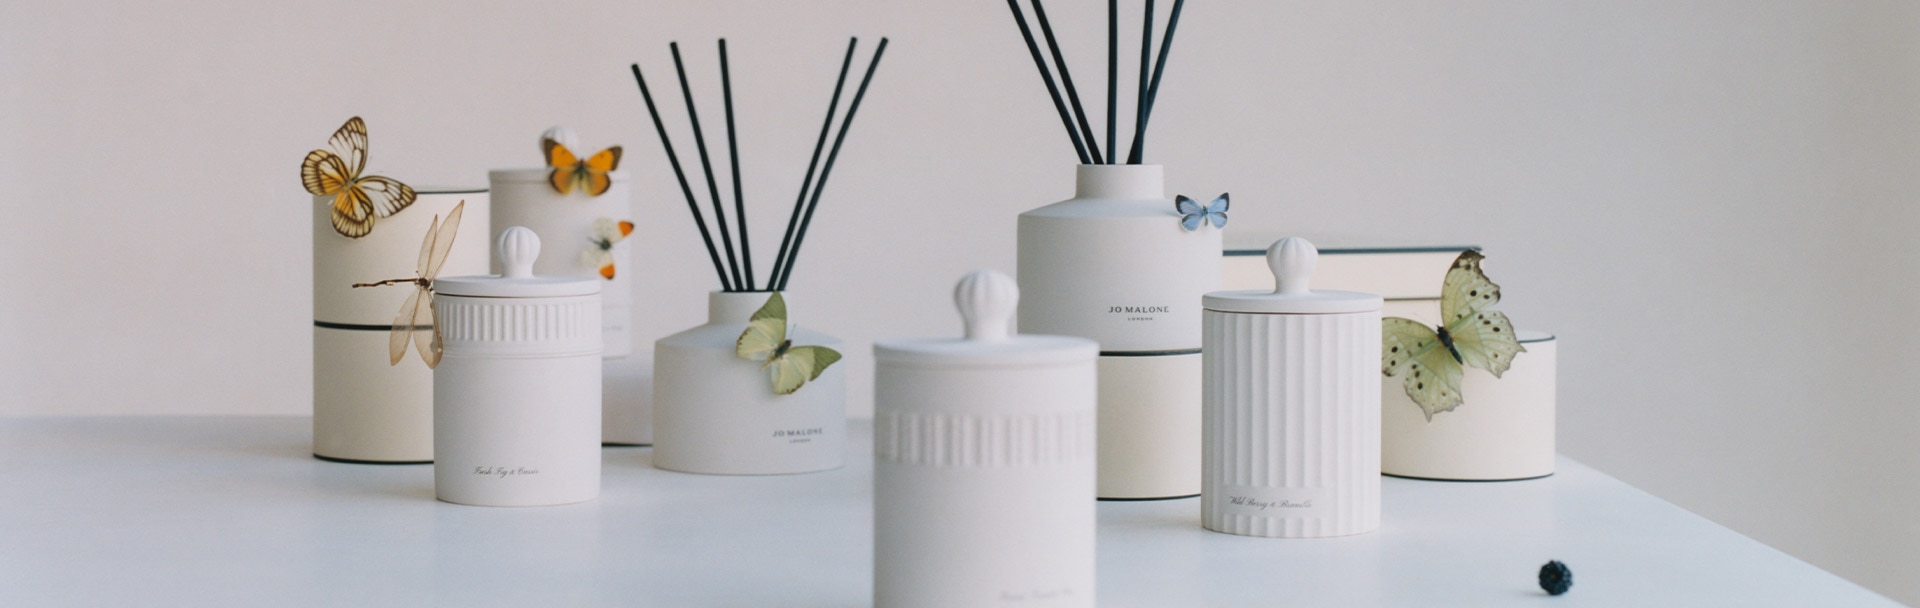 image of jo malone white ceramic townhouse diffusers and candles surrounded by boxes and butterflies